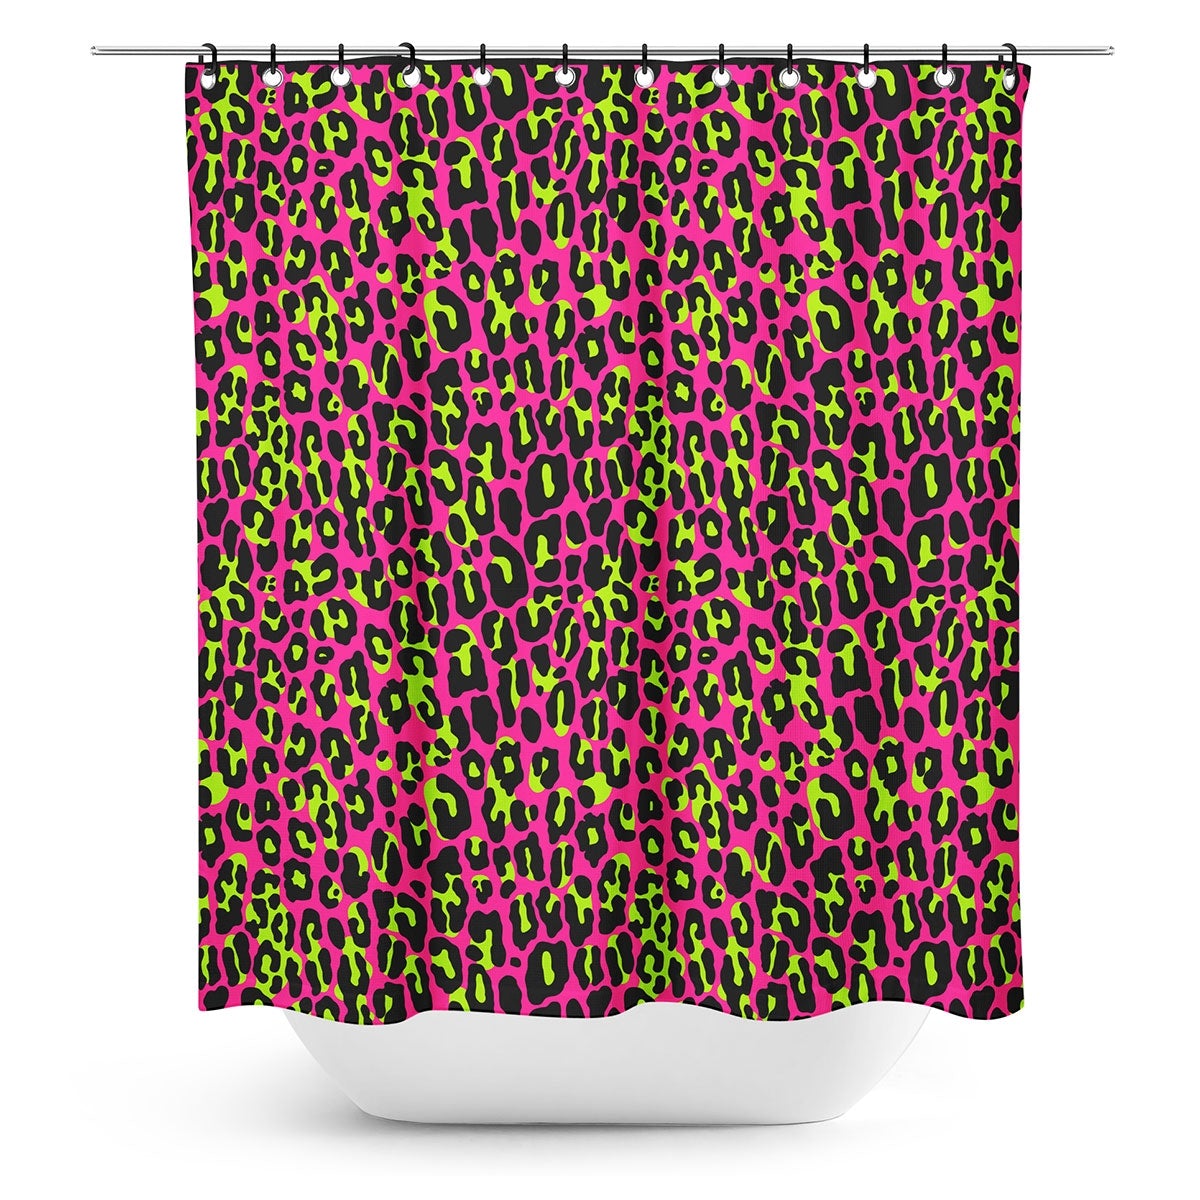 72" x 72" Polyester neon pink and green  print shower curtain with black plastic rings included